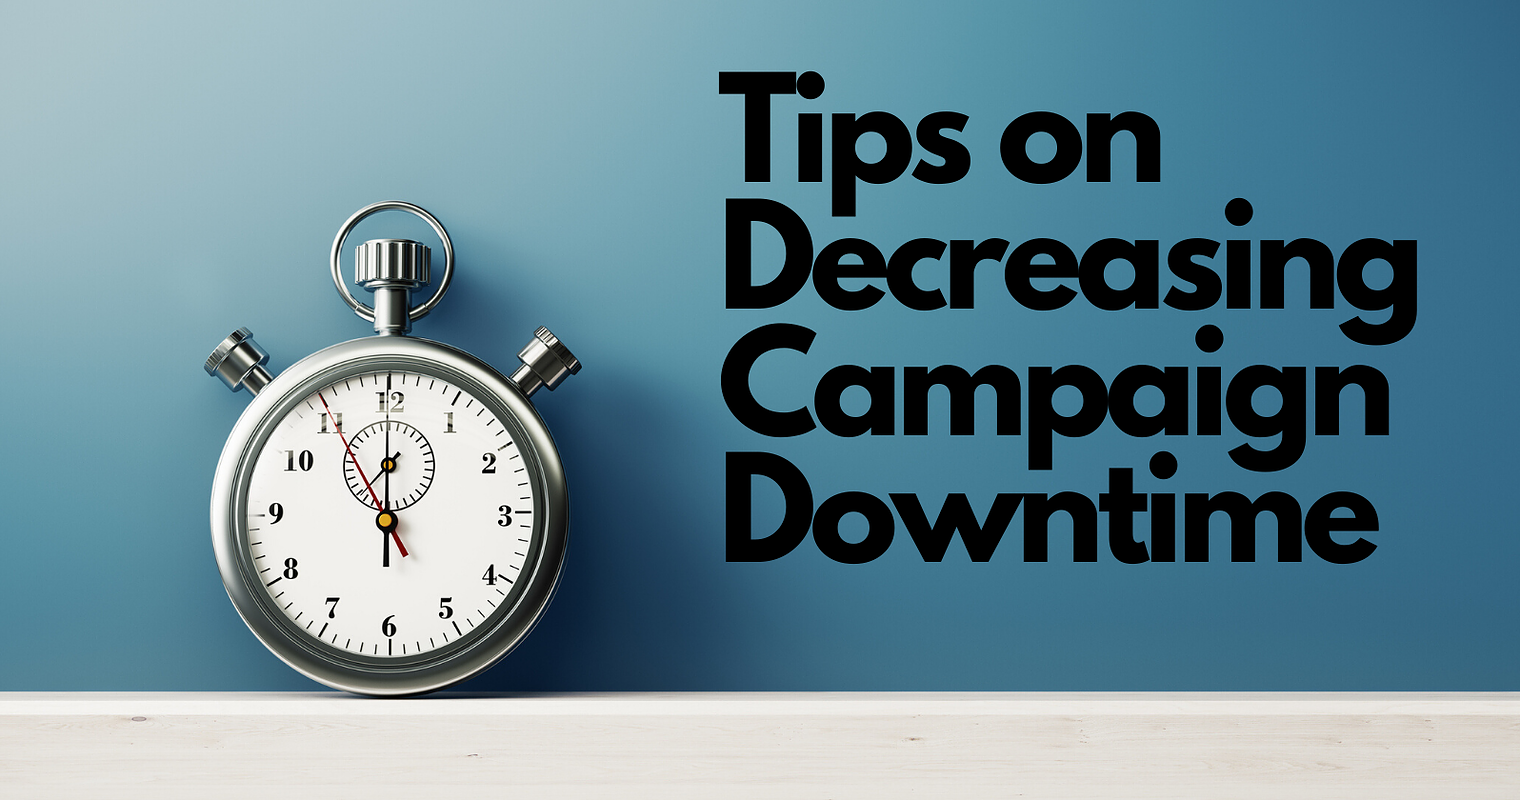 4 Top Tips for Decreasing Campaign Downtime